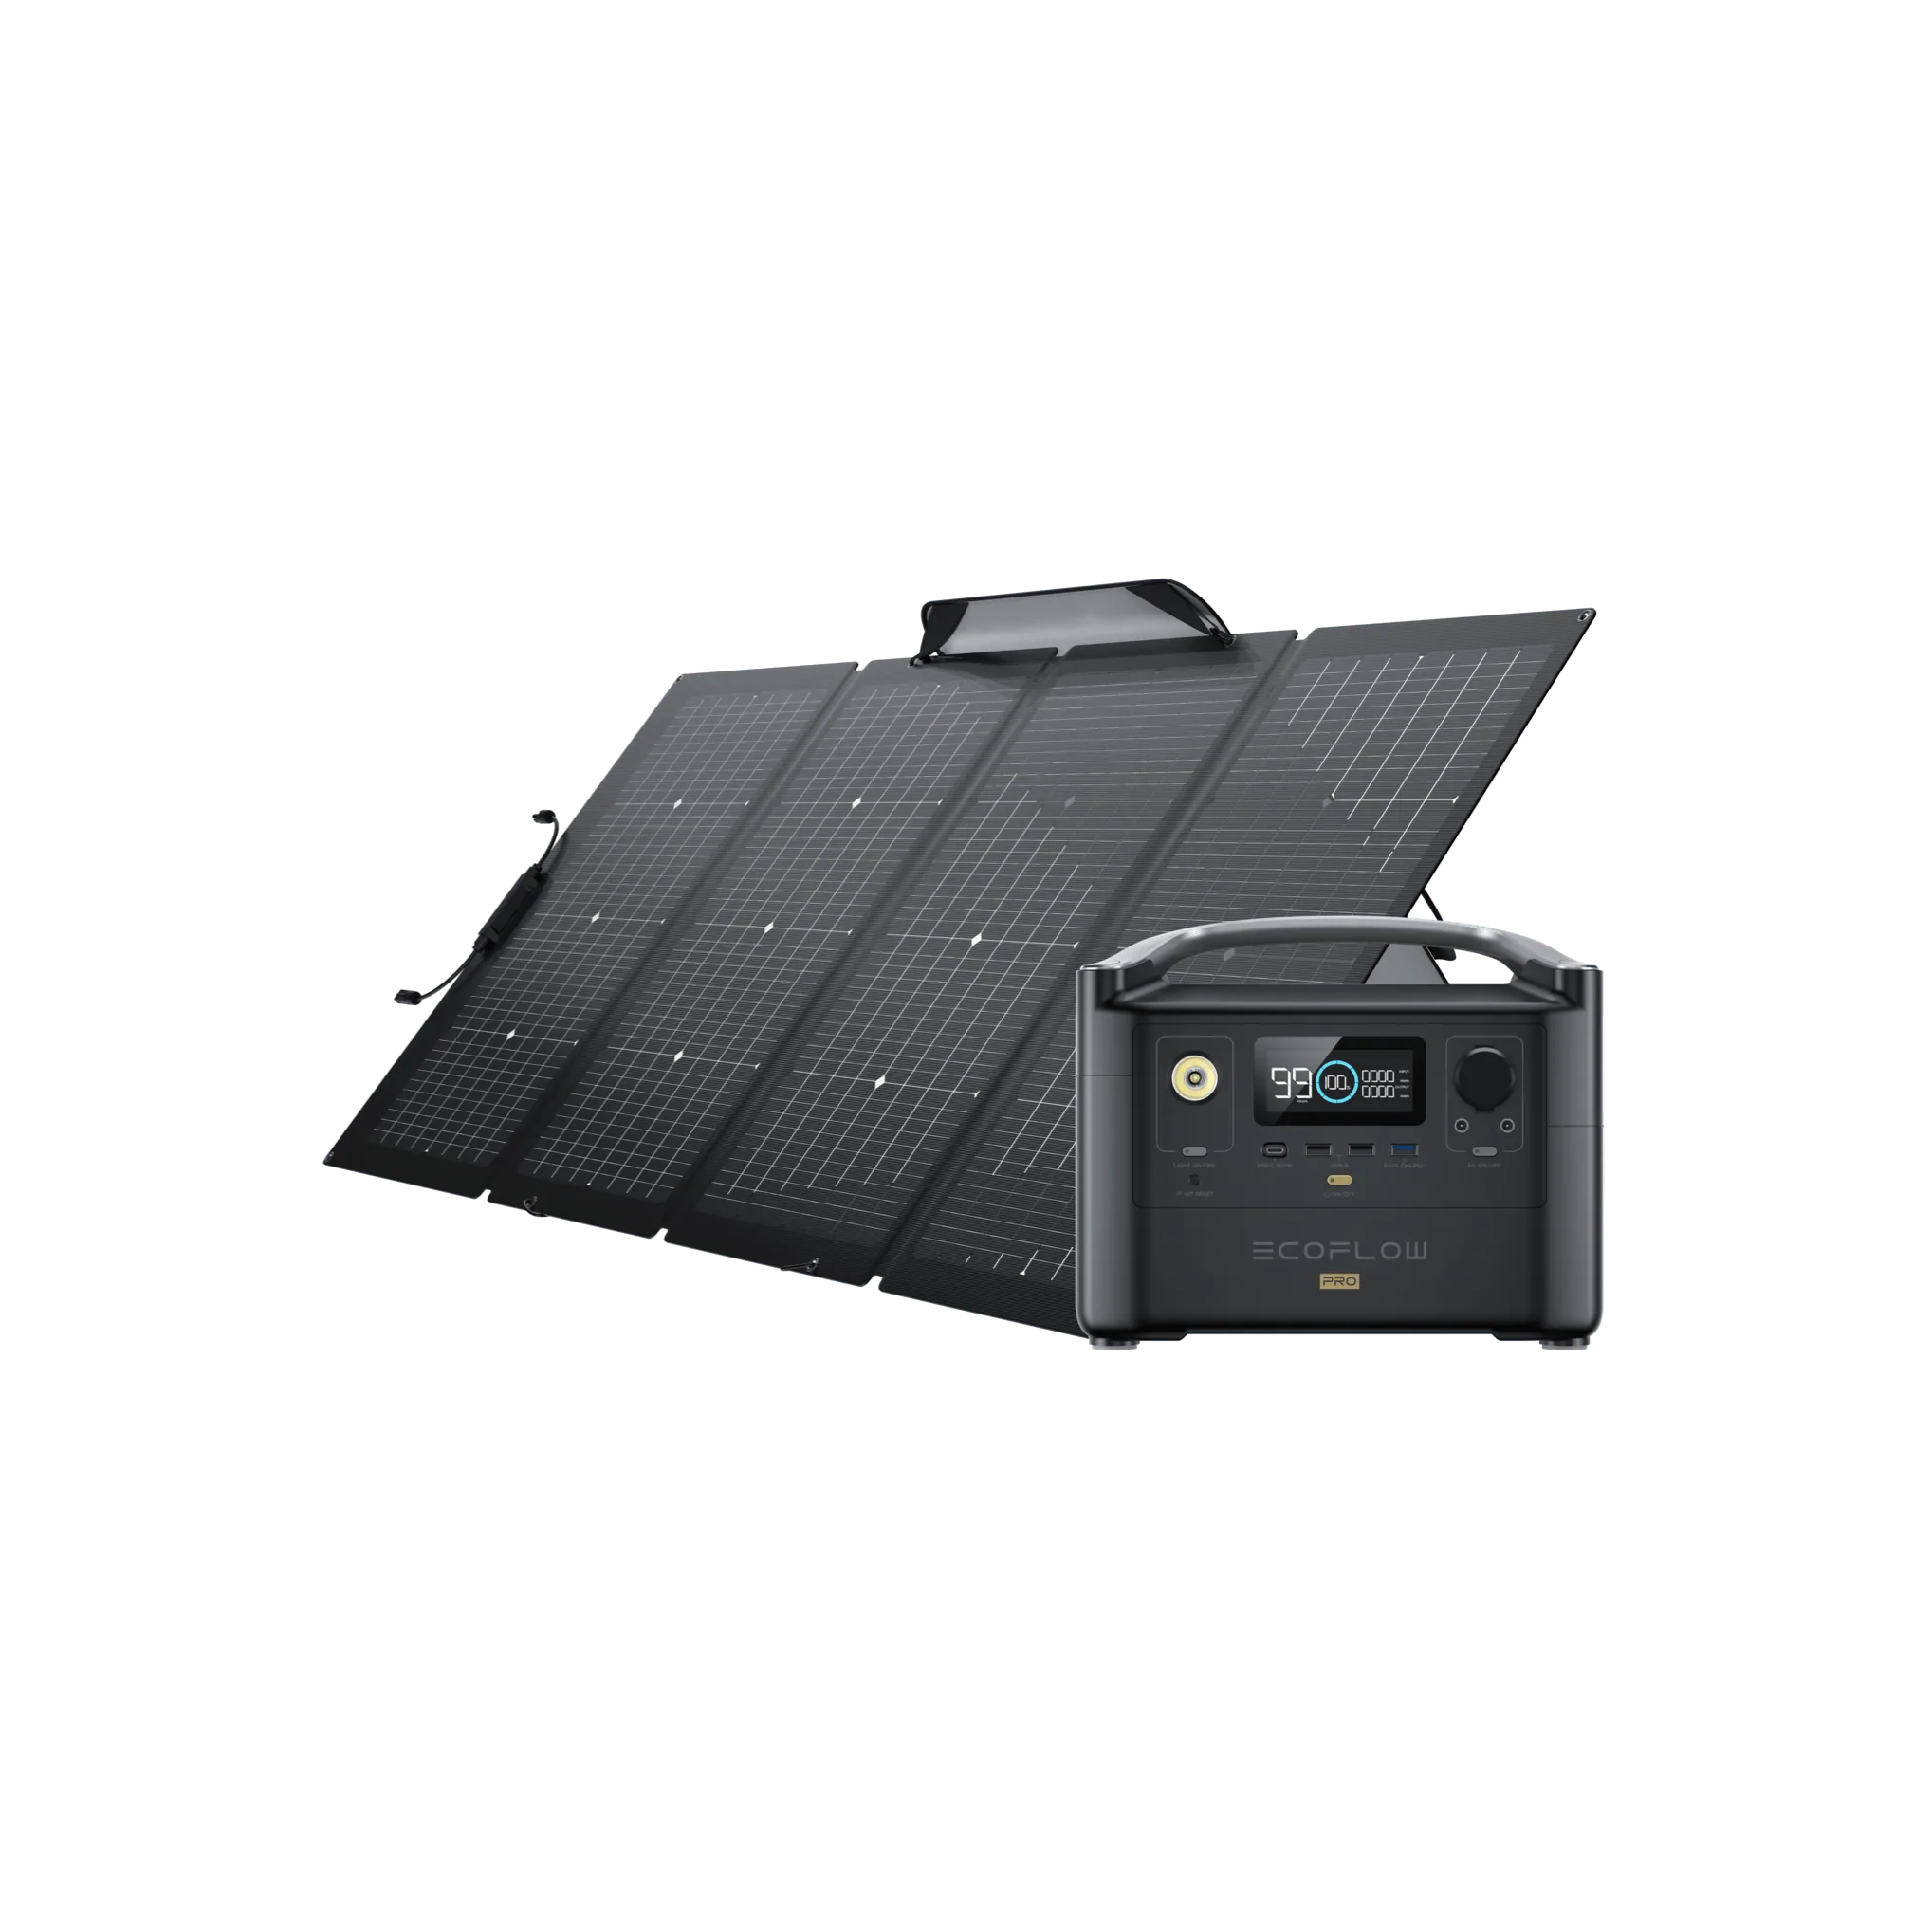 A solar panel with a battery and a charger, powered by the EcoFlow RIVER Pro Generator and including one portable 220W Solar Panel.